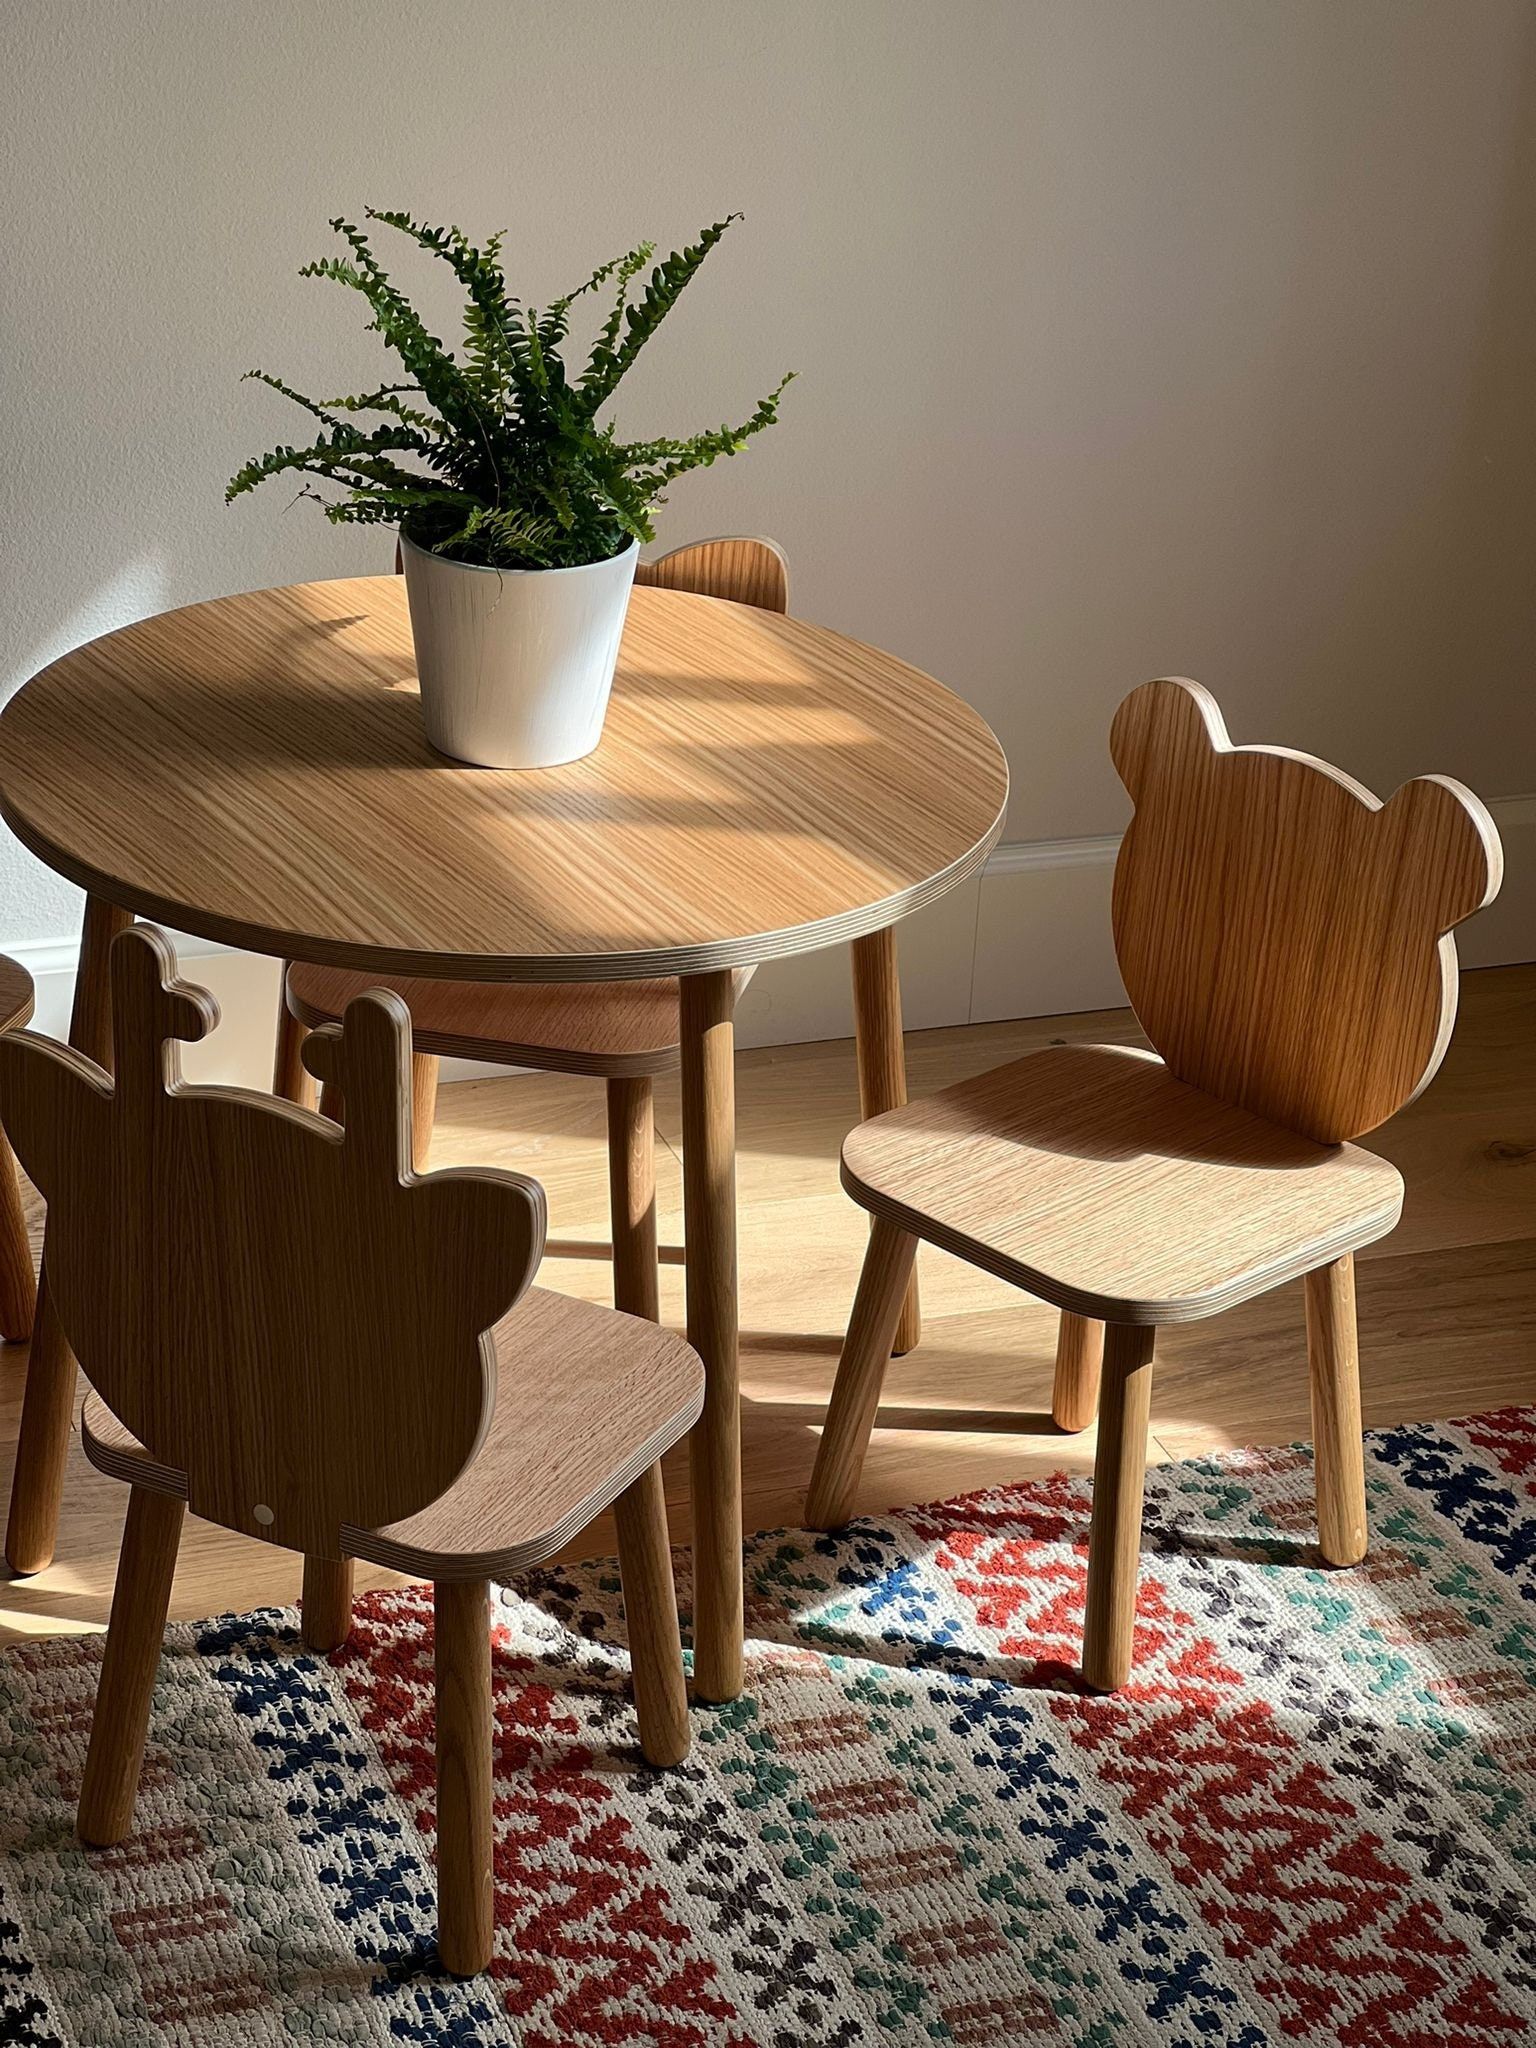 Kids table and chairs: ideal gift for
your child